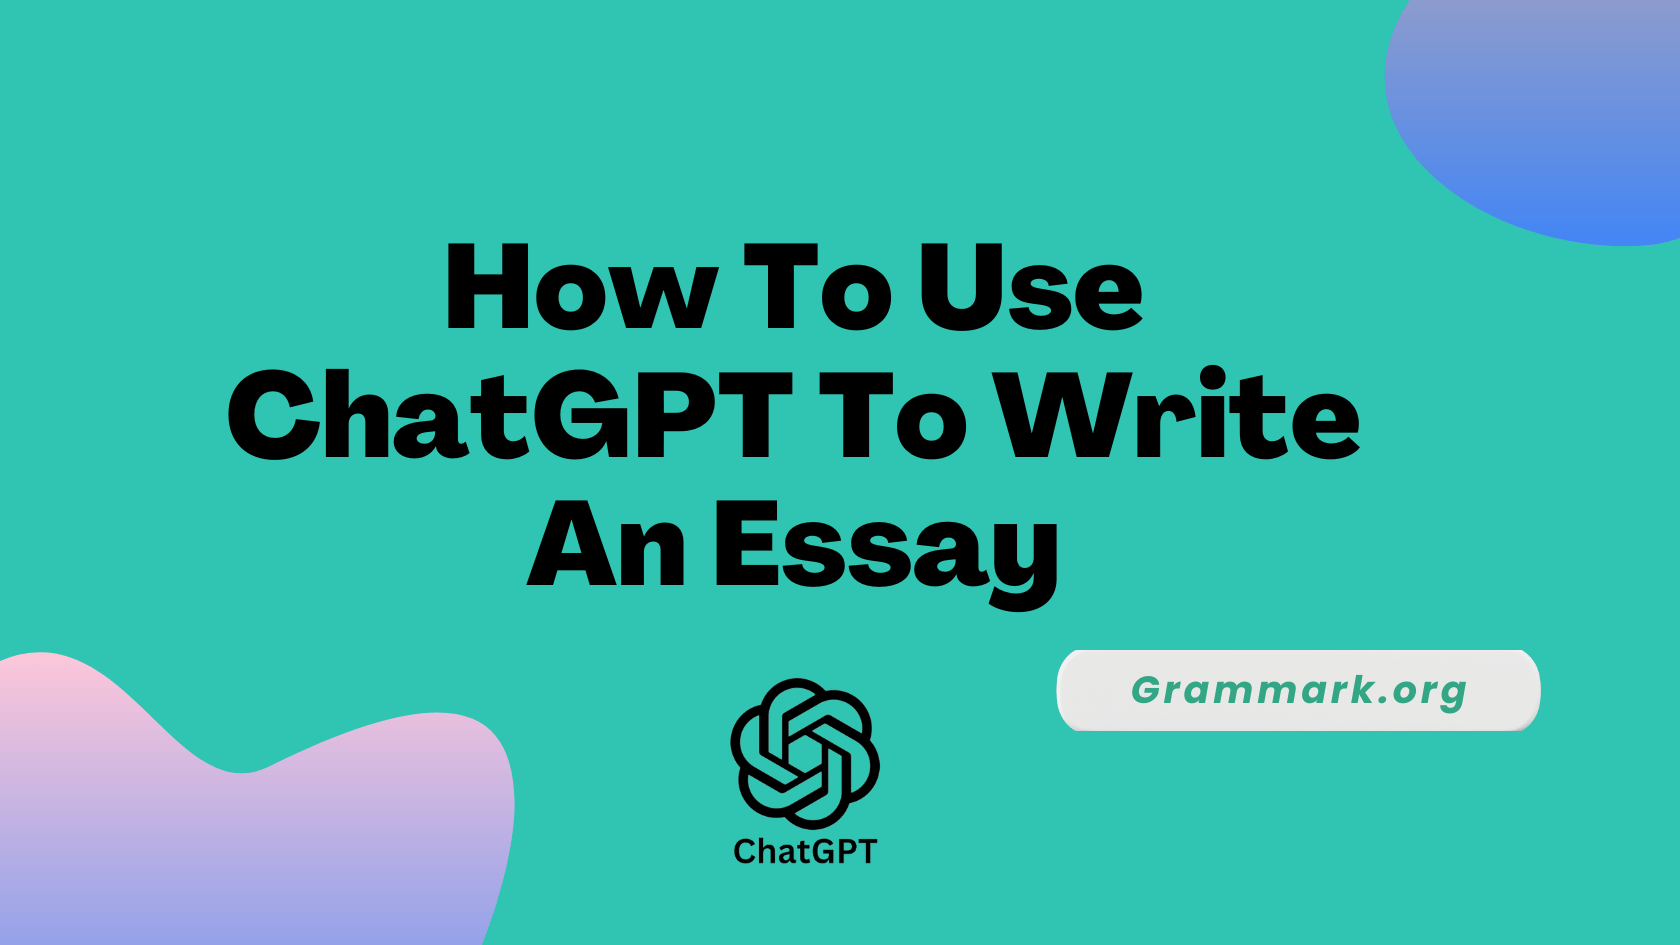 How To Use ChatGPT To Write An Essay (Beginner’s Guide)